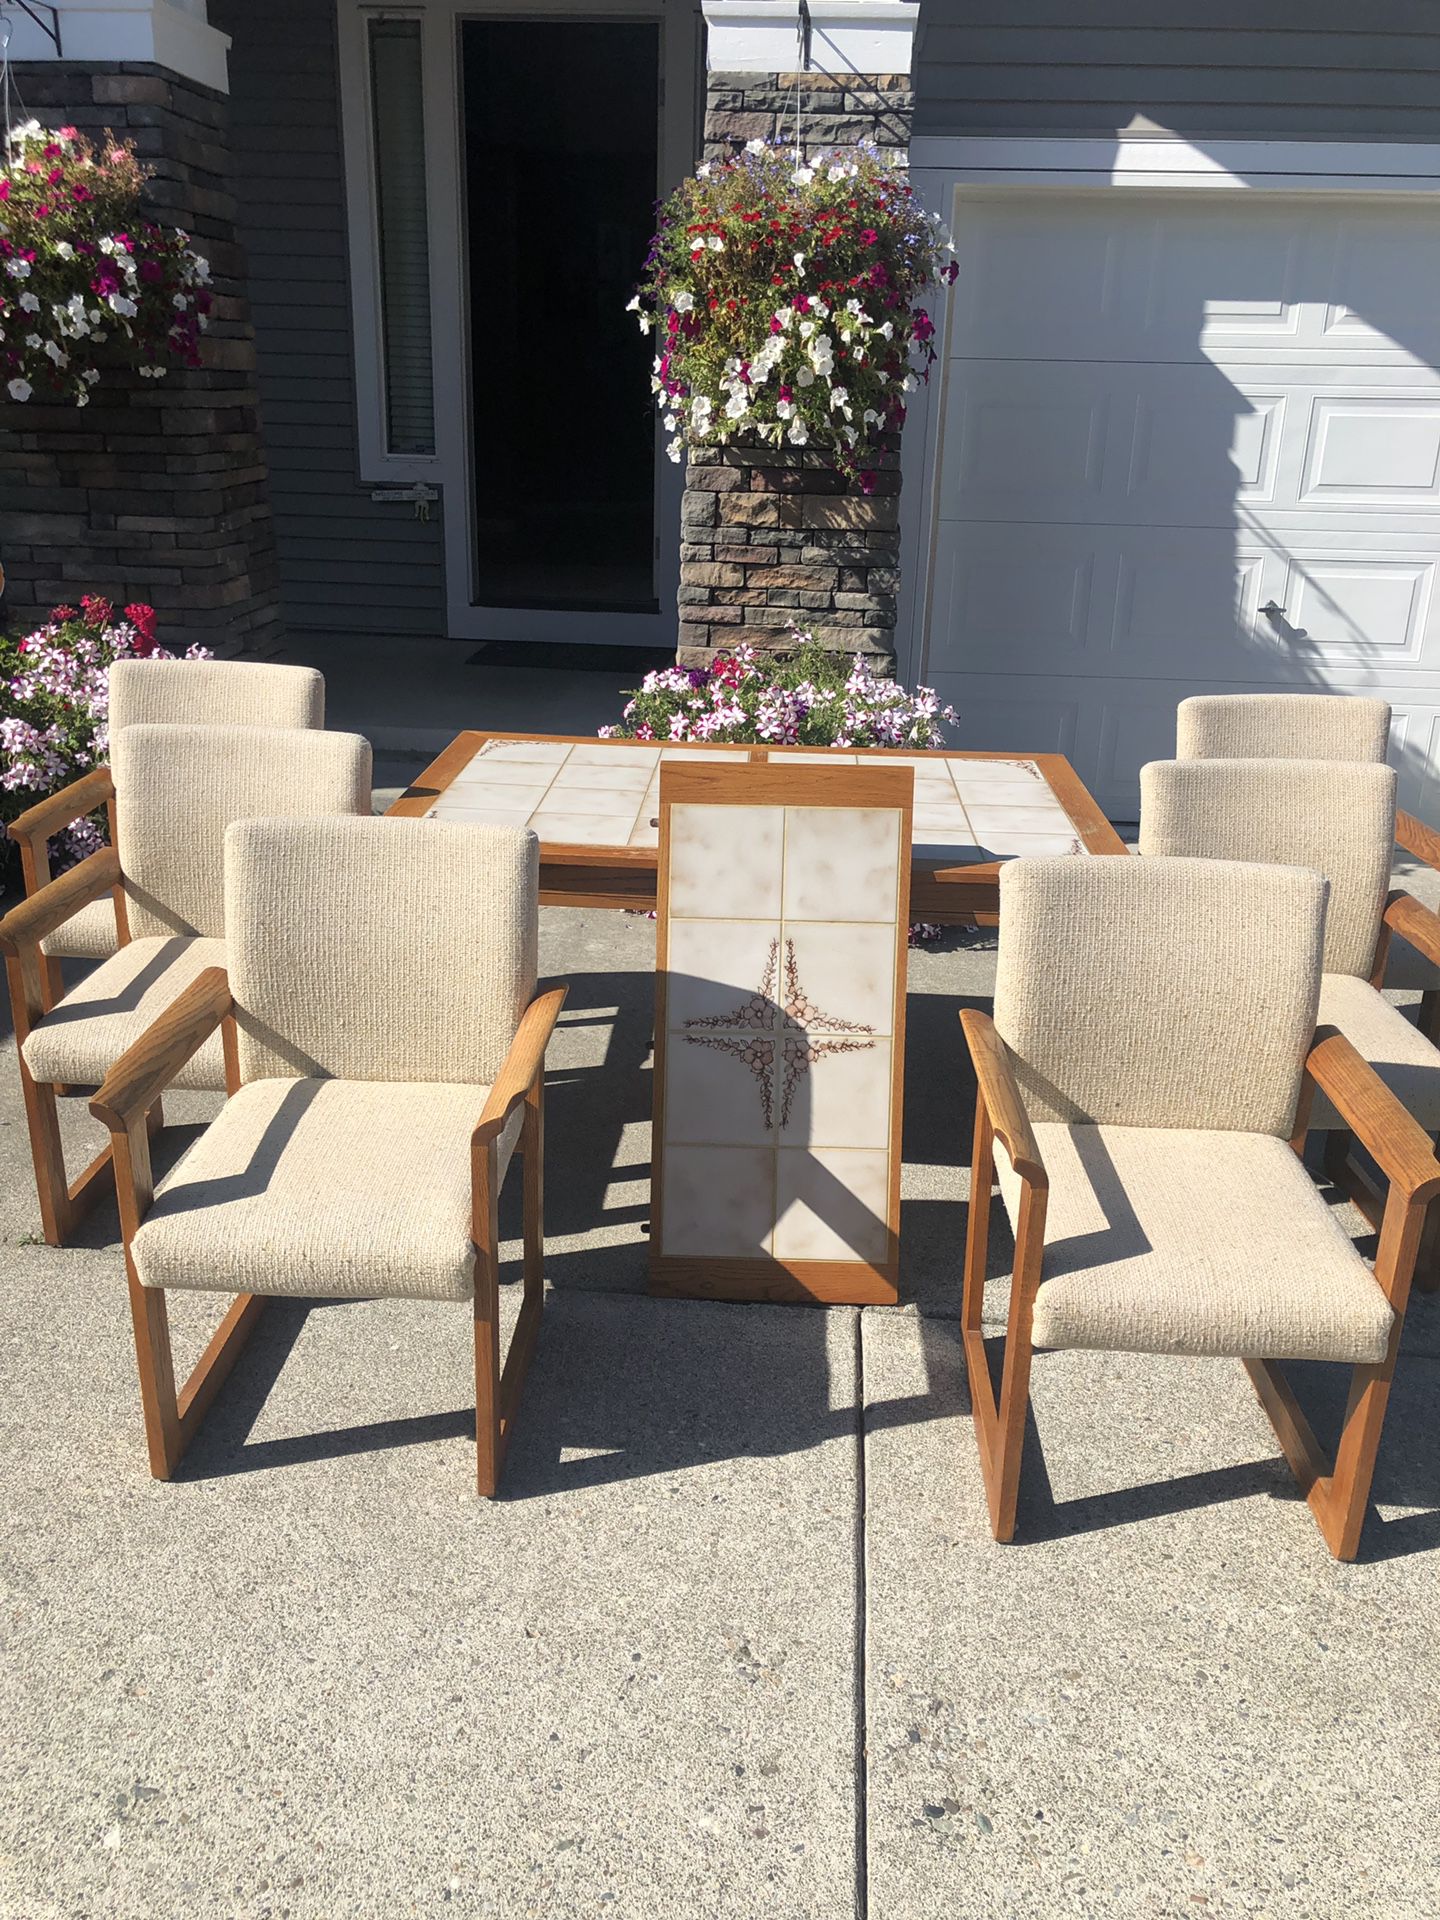 Heavy duty table with a leaf and 6 chairs.